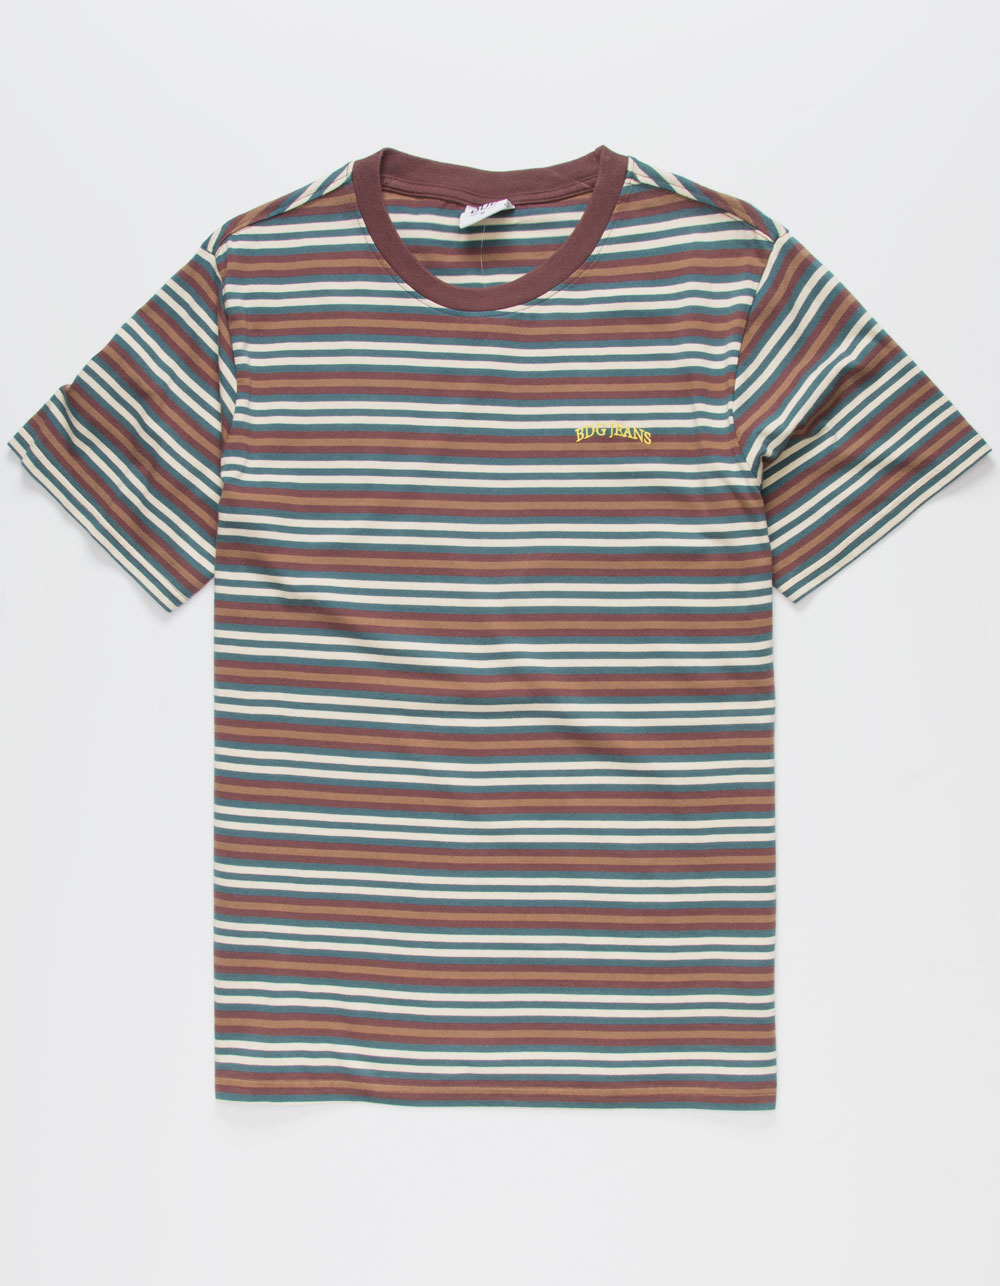 BDG Urban Outfitters Stripe Mens Tee - CHOCOLATE | Tillys